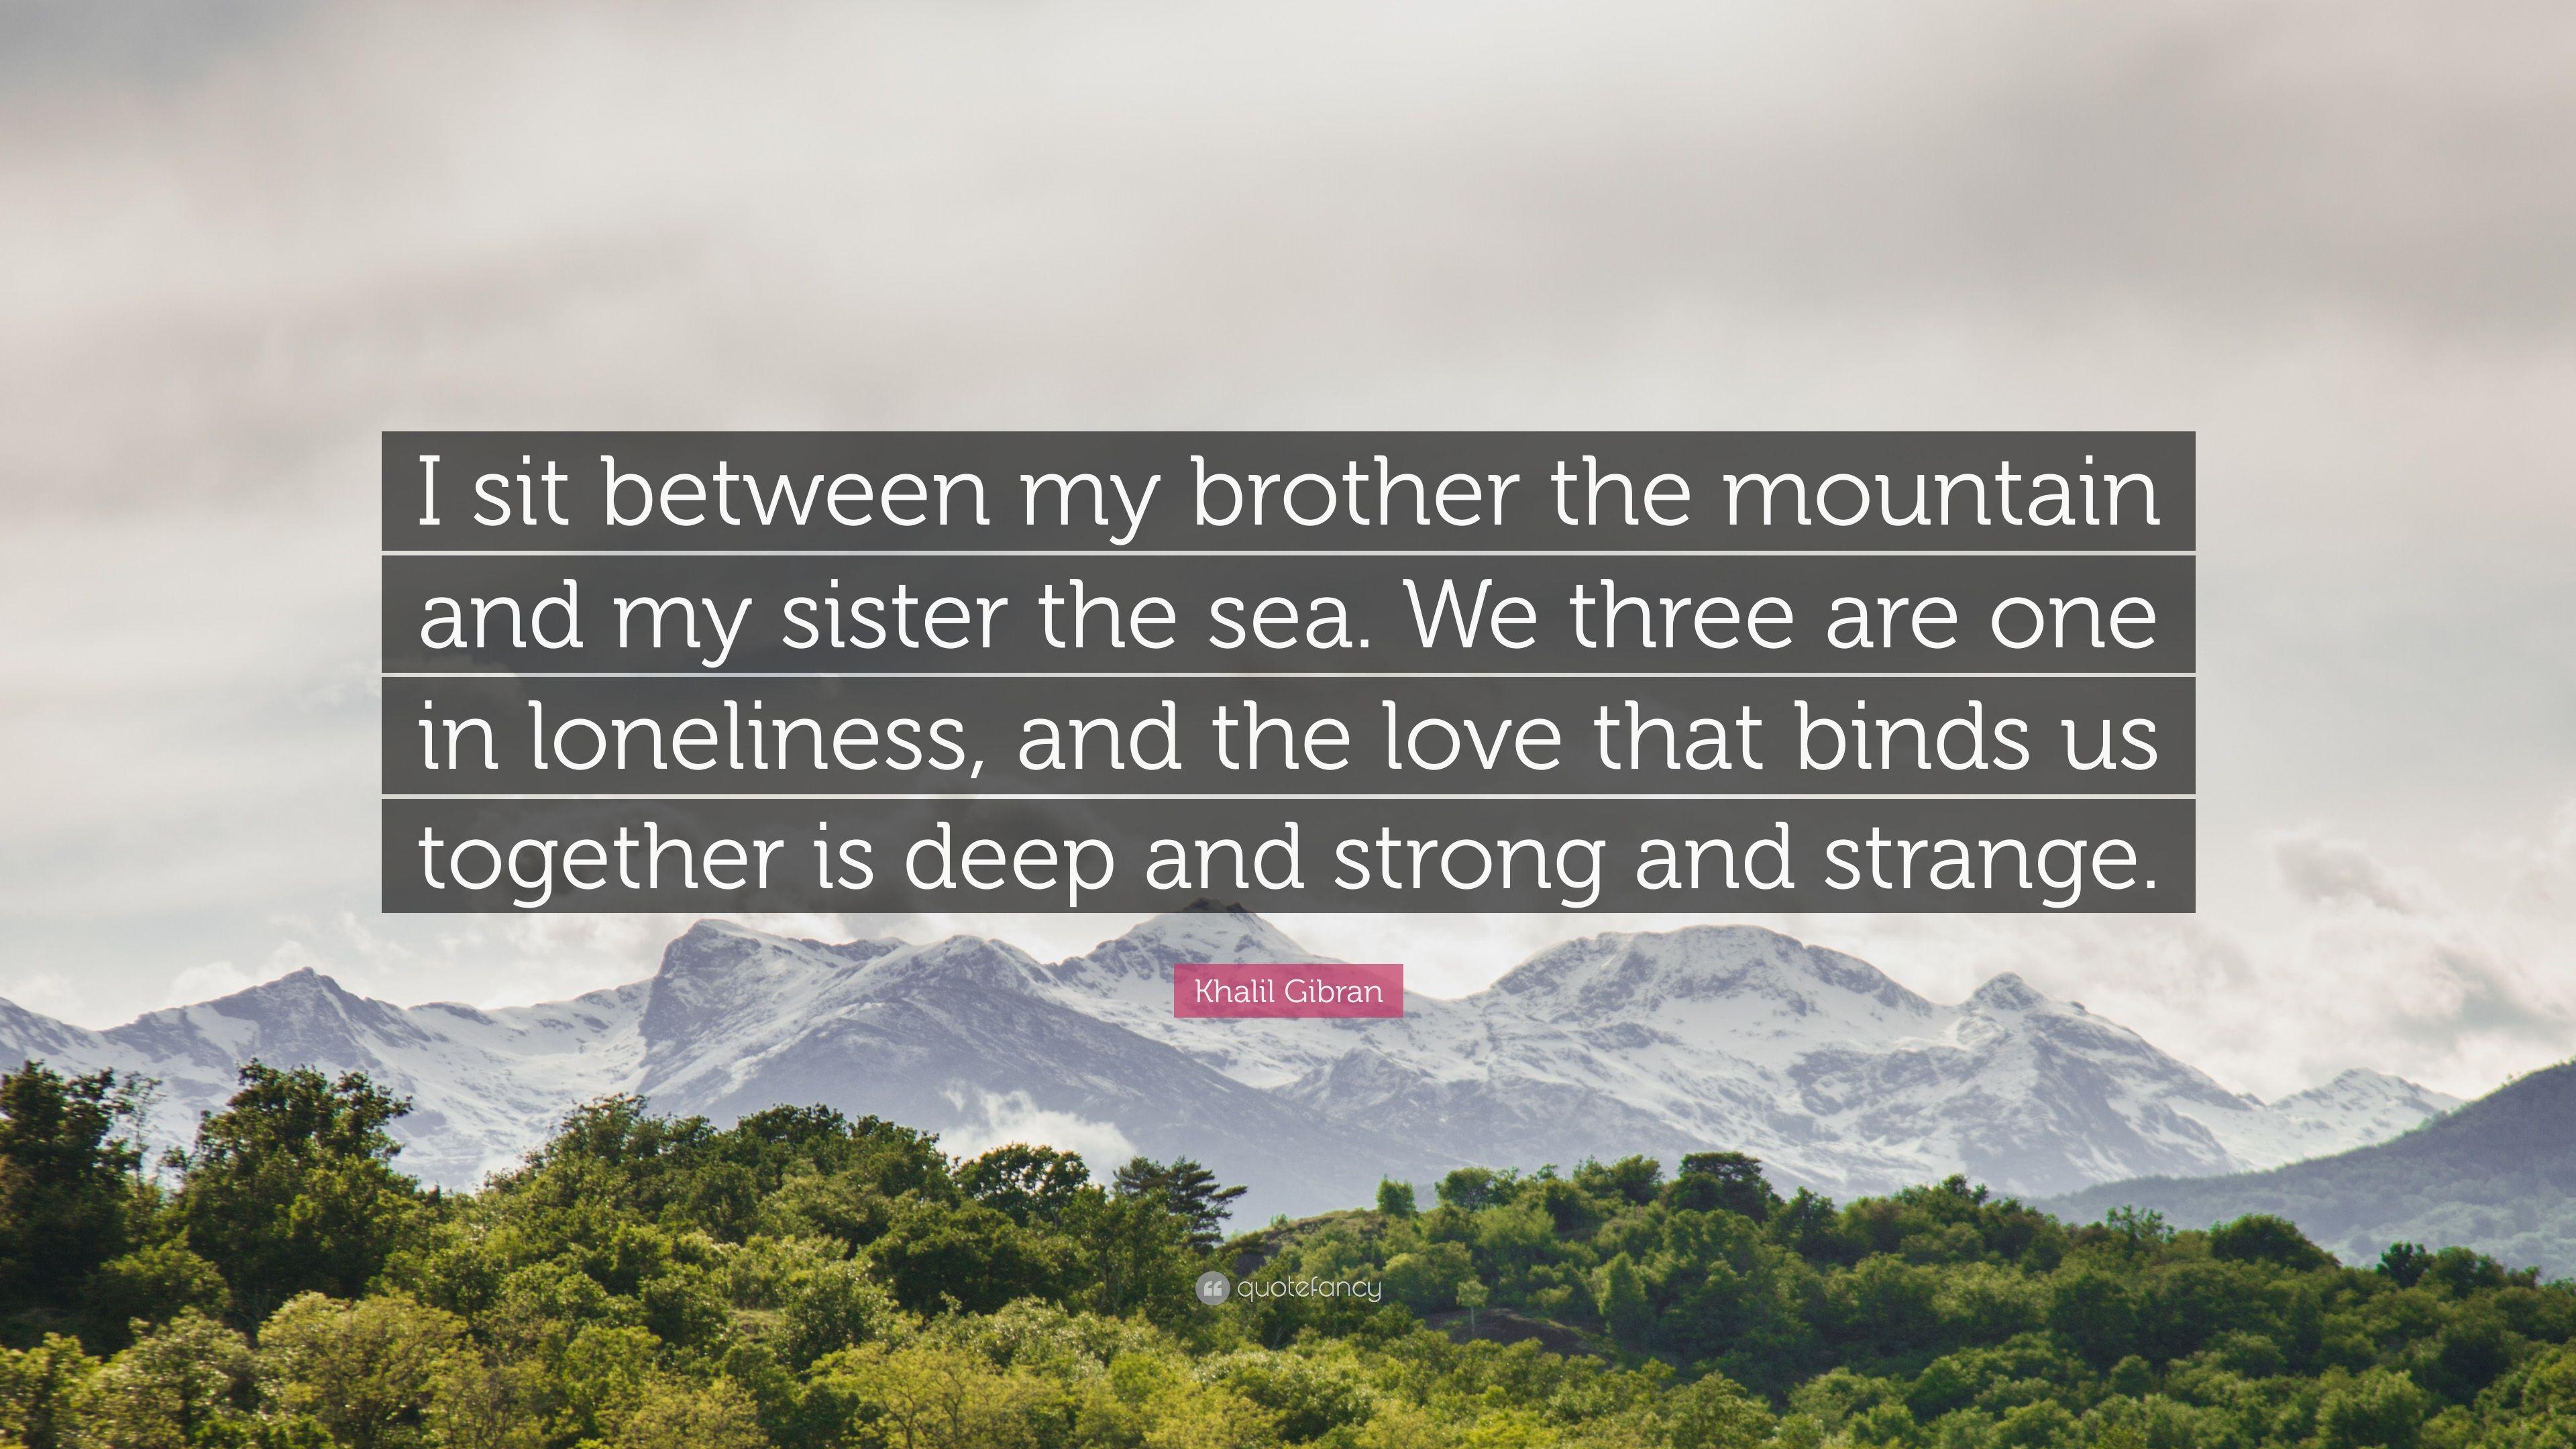 Khalil Gibran Quote: “I sit between my brother the mountain and my